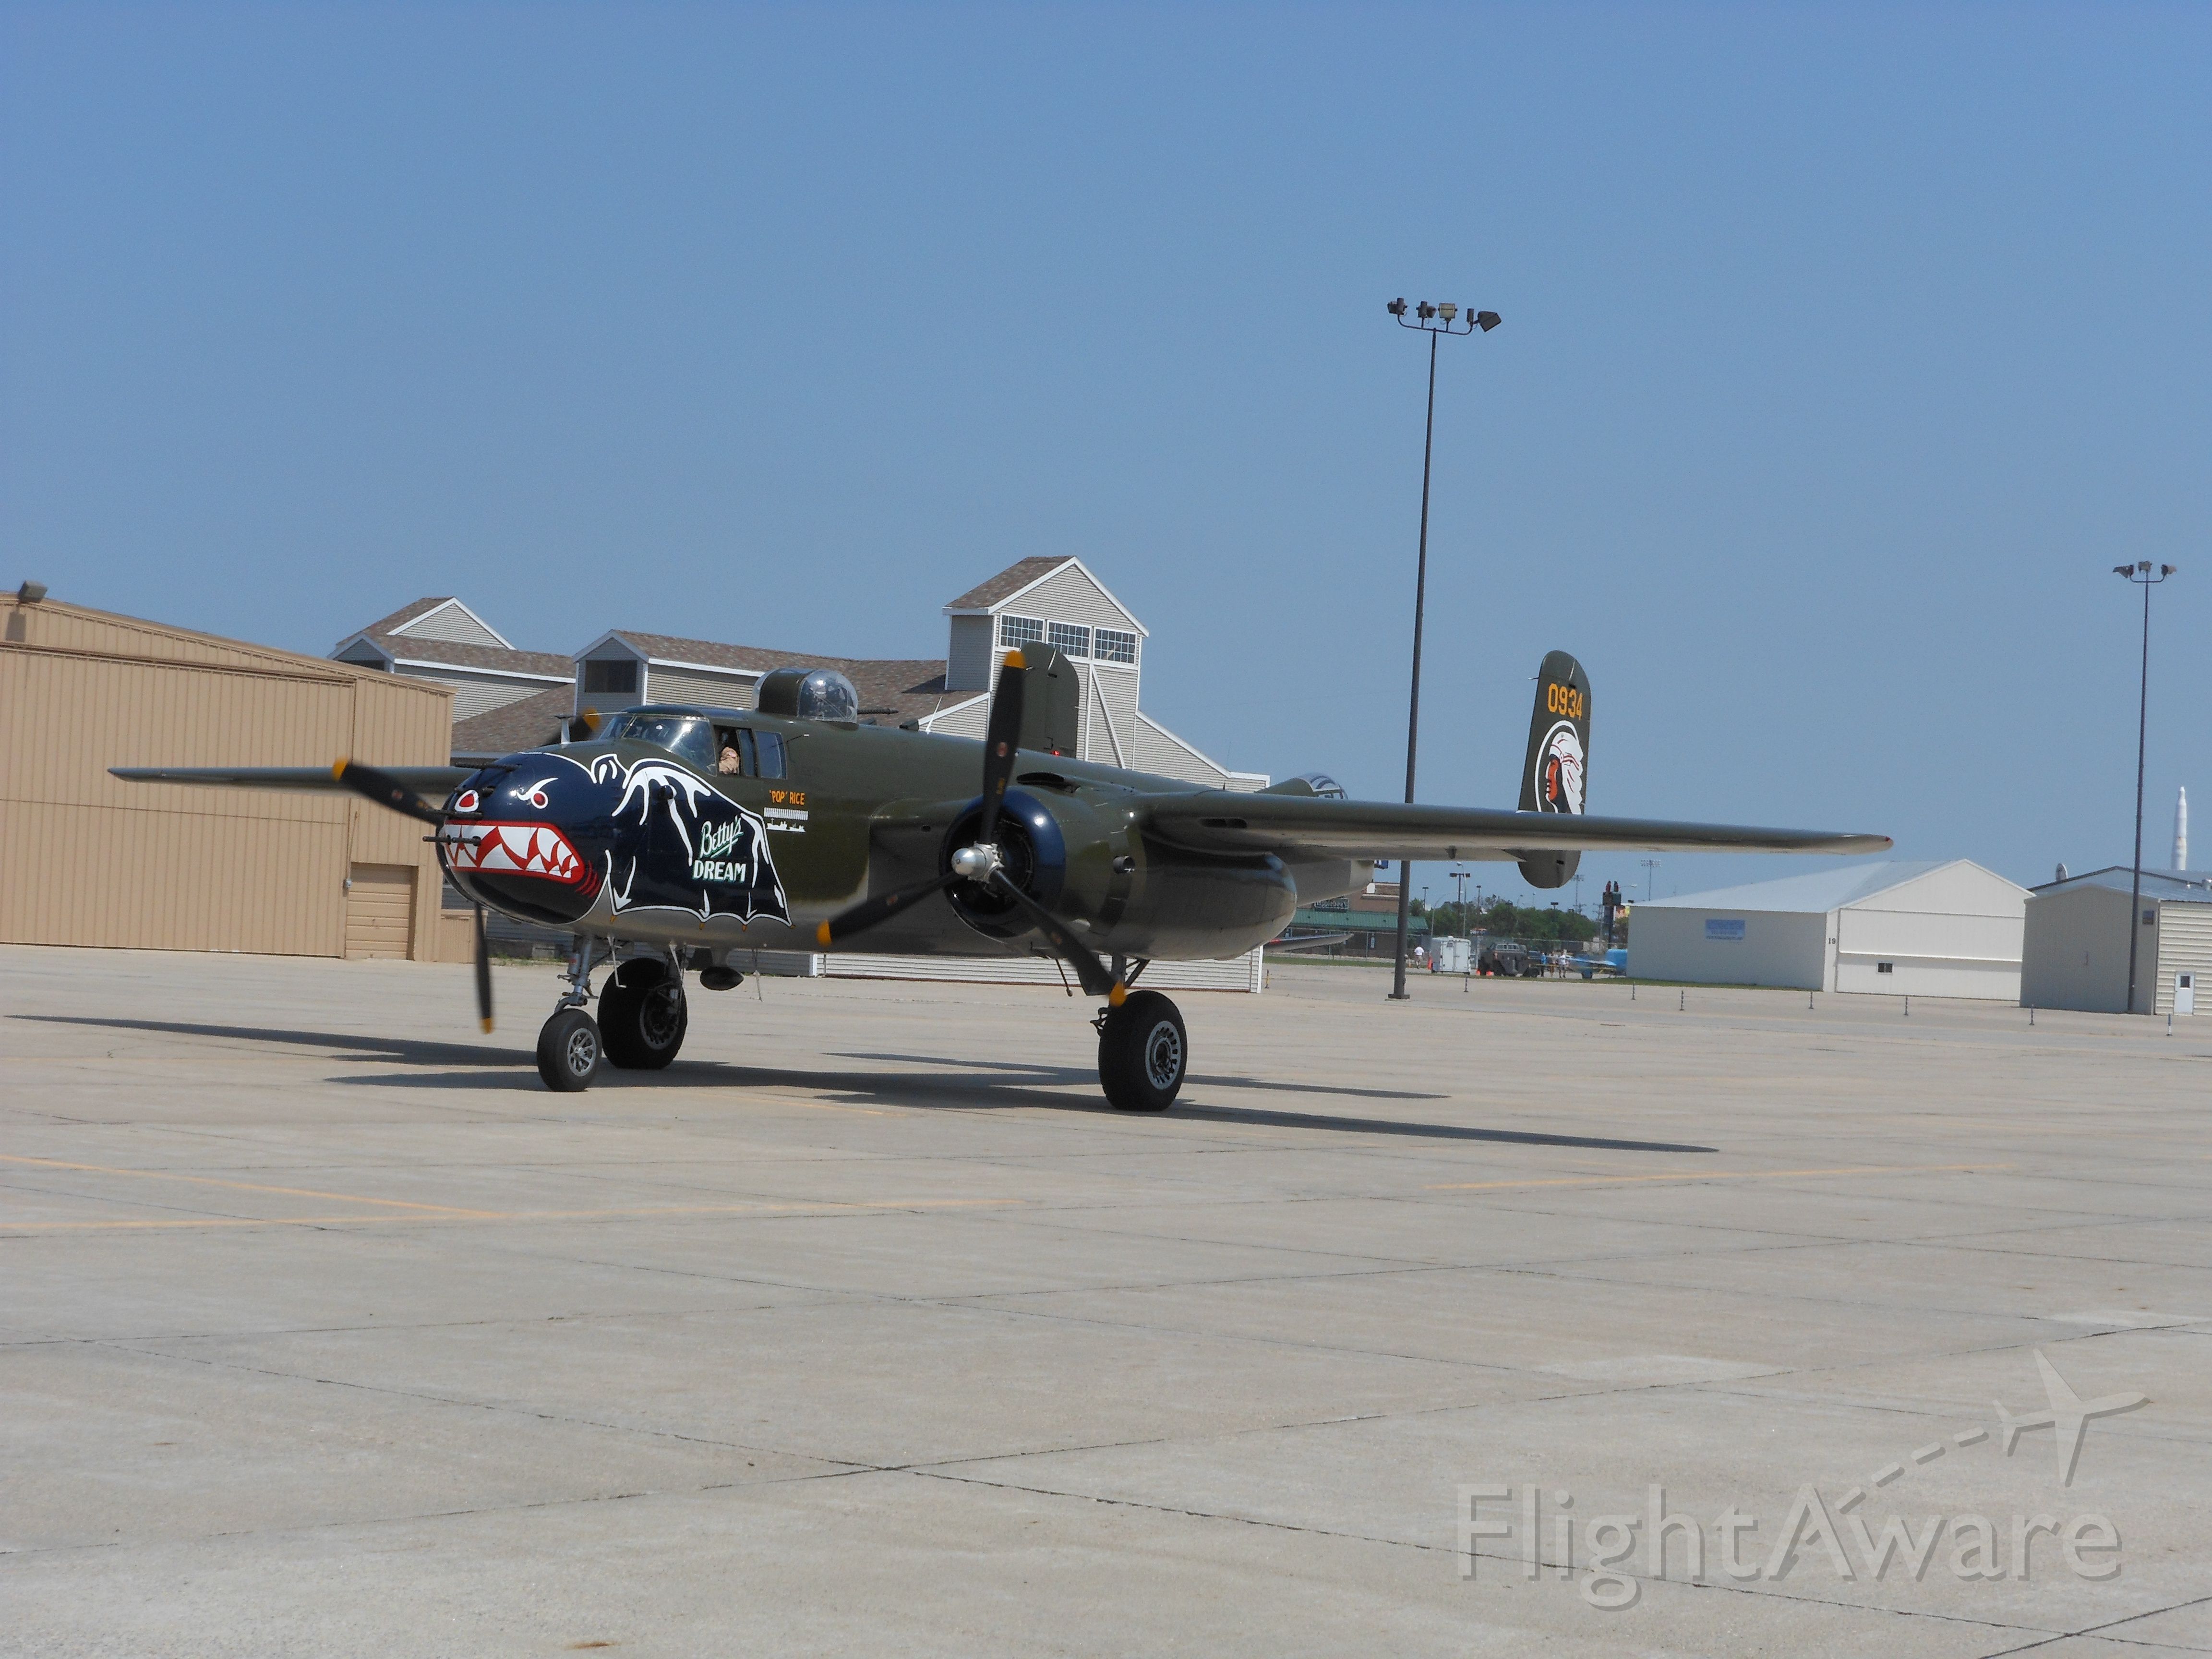 N5672V — - N5672V (s/n 10847686), a 1945 B-25J, if you look closely at the nose you can see the gunship modification which adds 8 .50 cal. Browning machine guns.